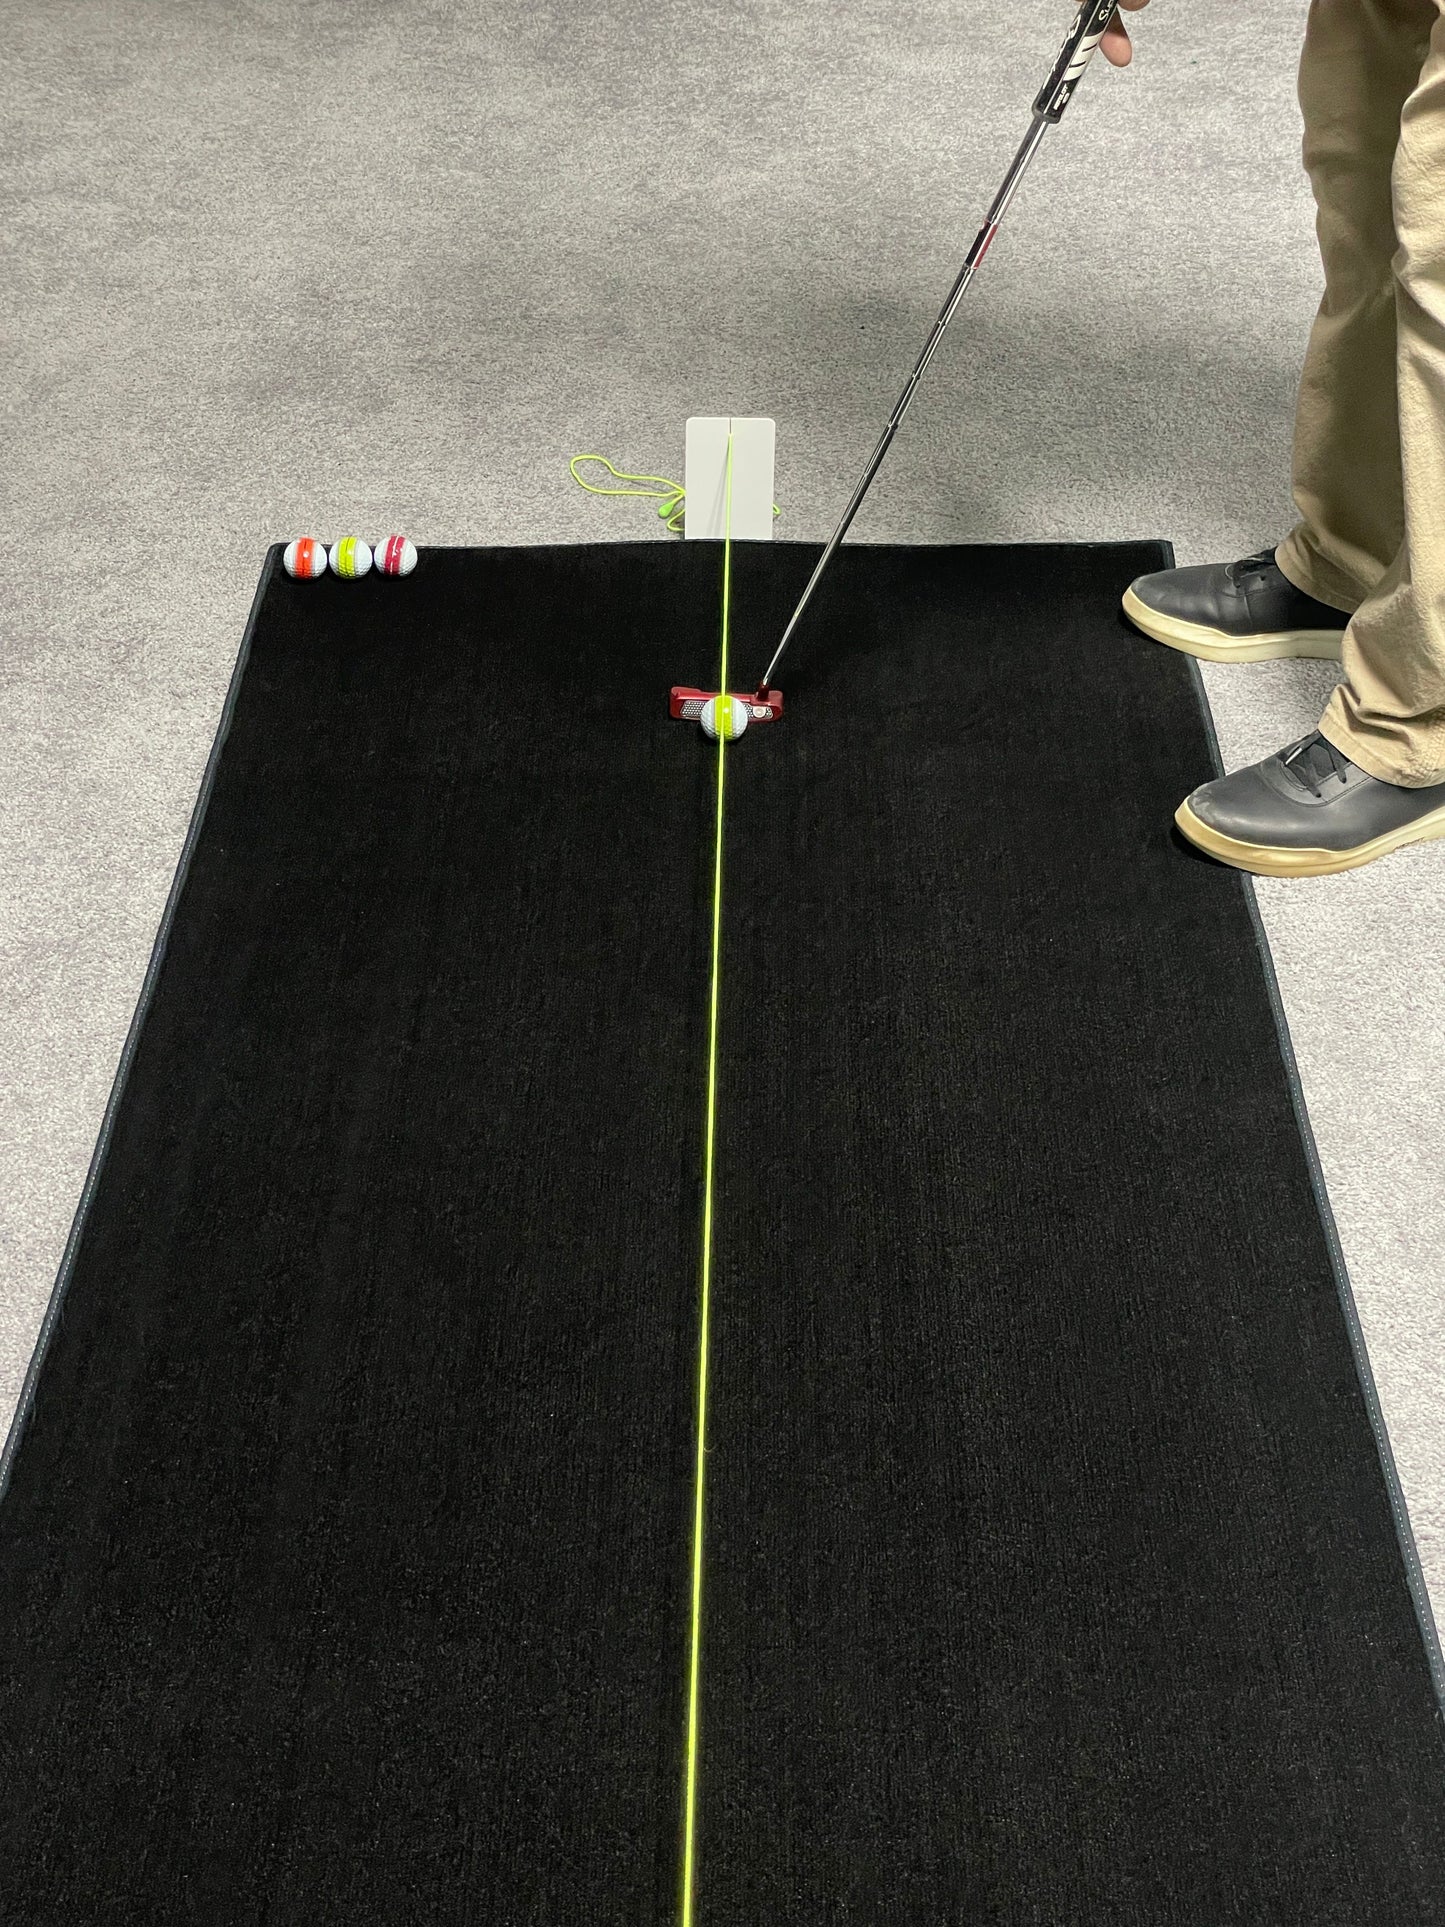 Black Competitor Putting Green-Limited Edition